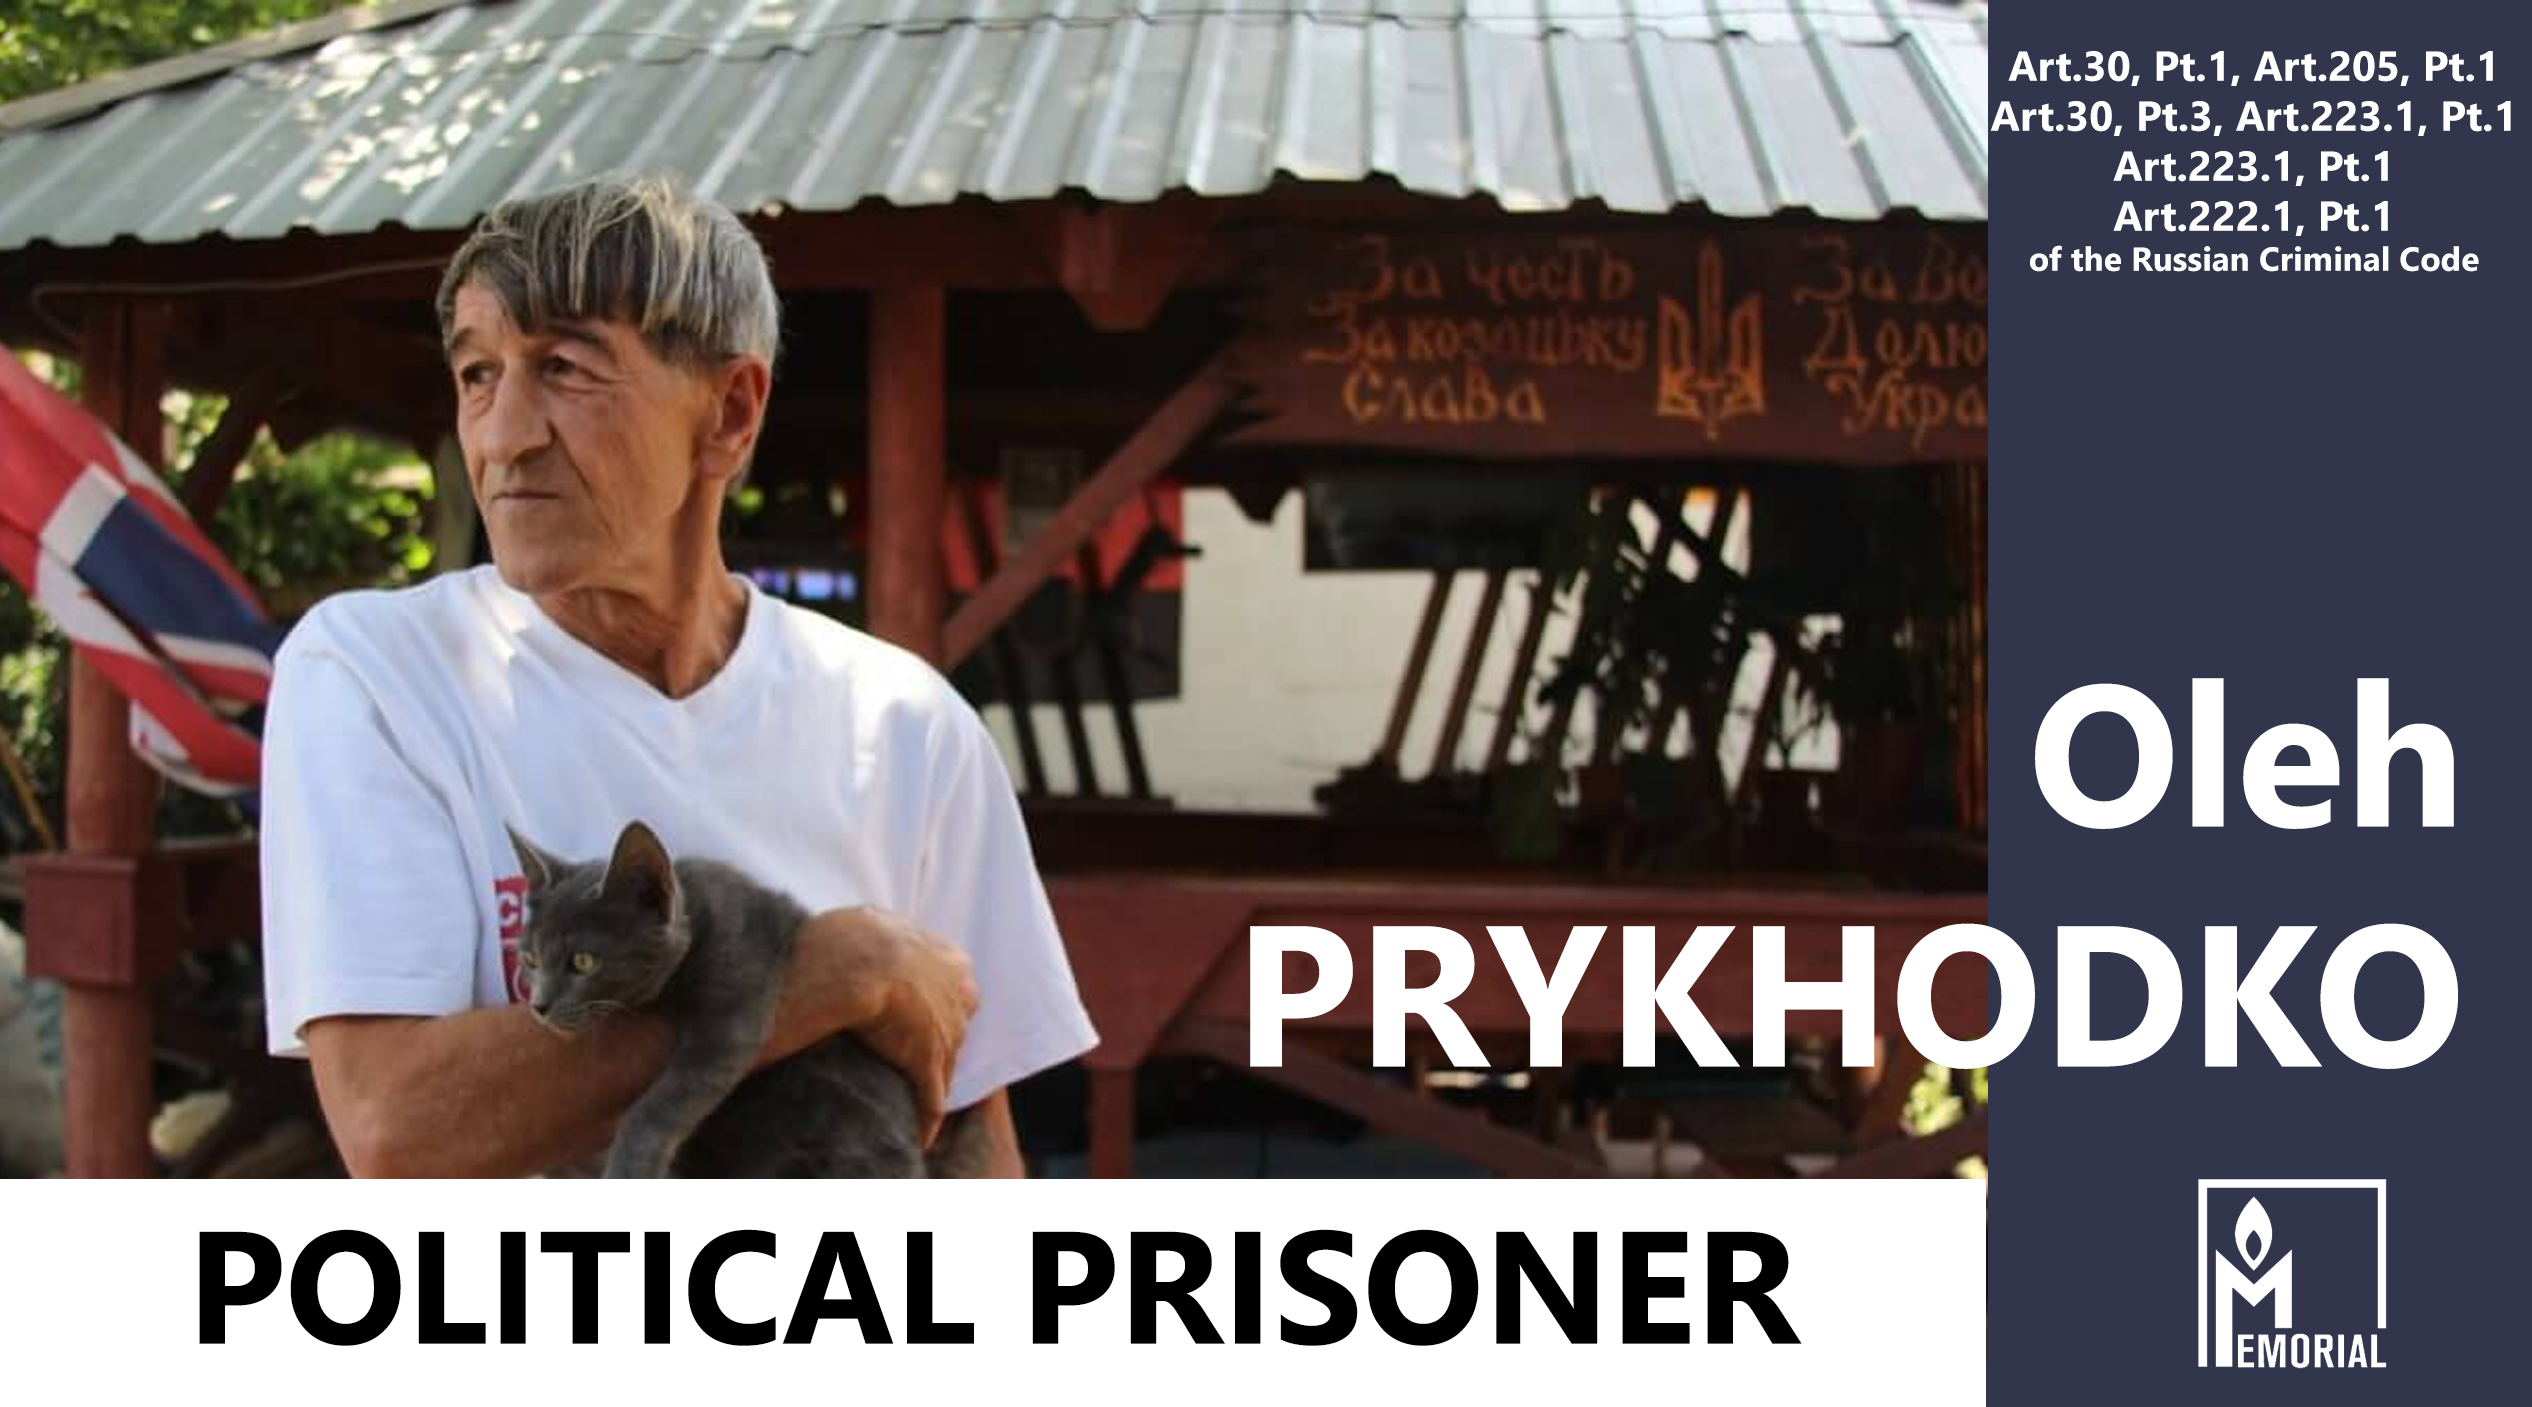 Oleh Prykhodko, a resident of Crimea convicted of attempting to perpetrate an act of terrorism, is a political prisoner